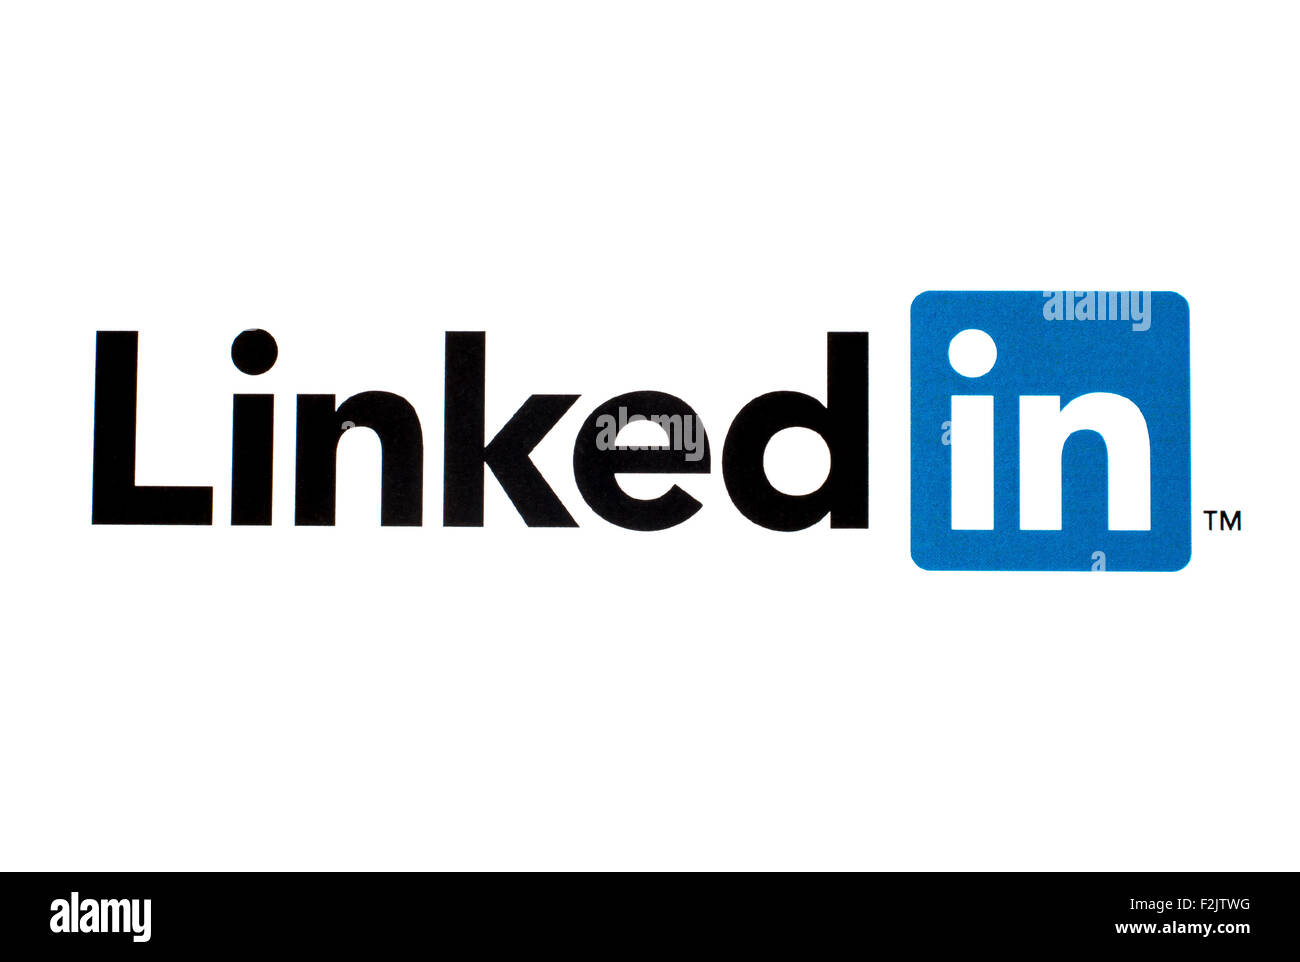 GDANSK, POLAND - MAY 26, 2015. LinkedIn logo printed on paper and placed on white background. Stock Photo